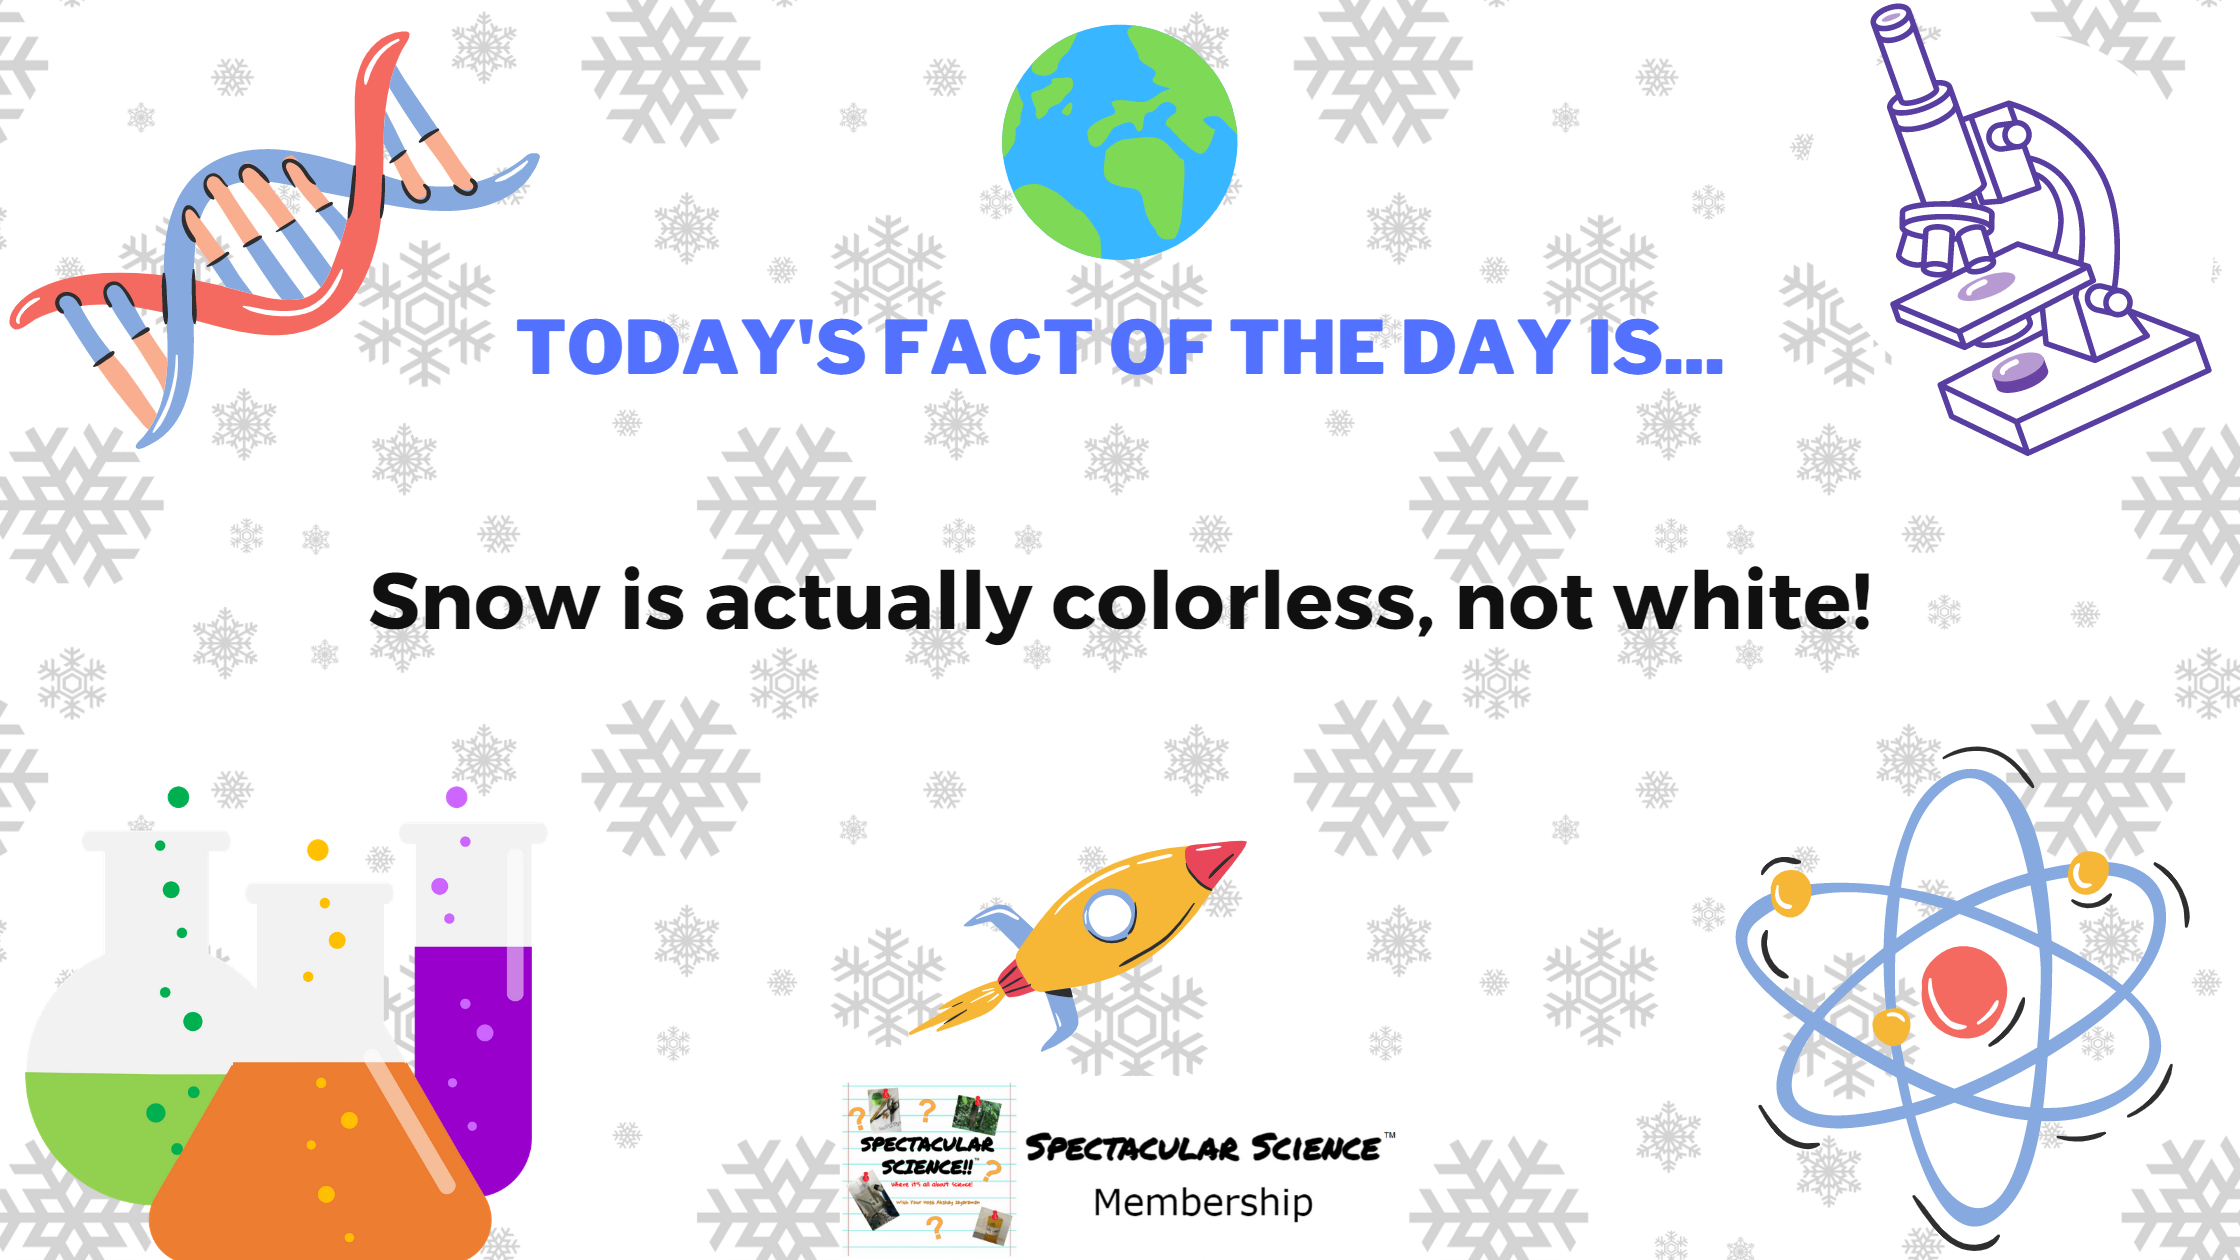 Fact of the Day Image December 26th